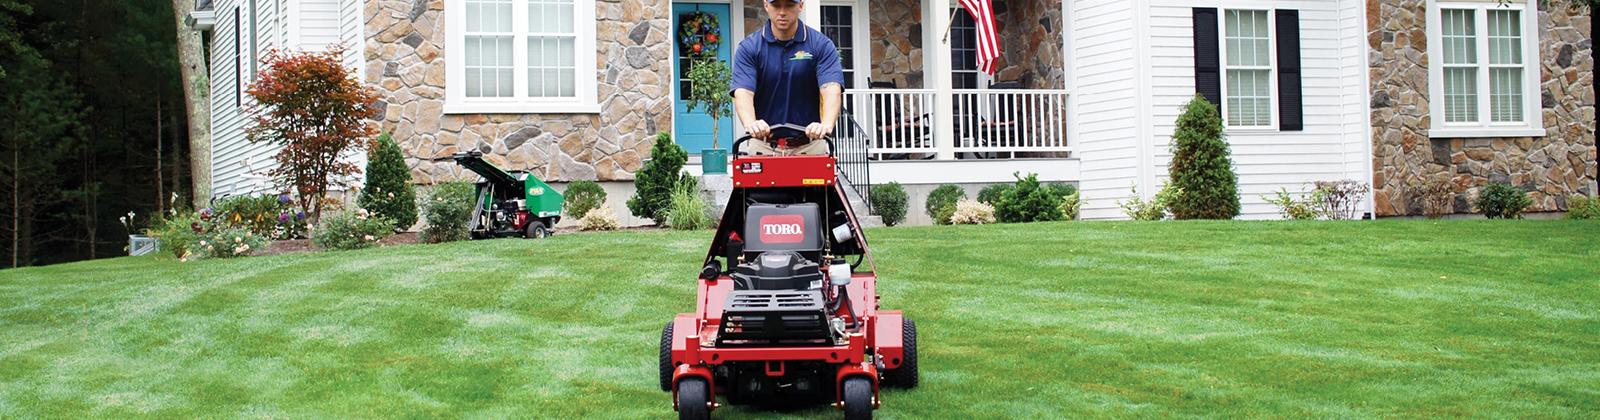 Lawn Aeration Service Near Me - Free Price Quote - NaturaLawn